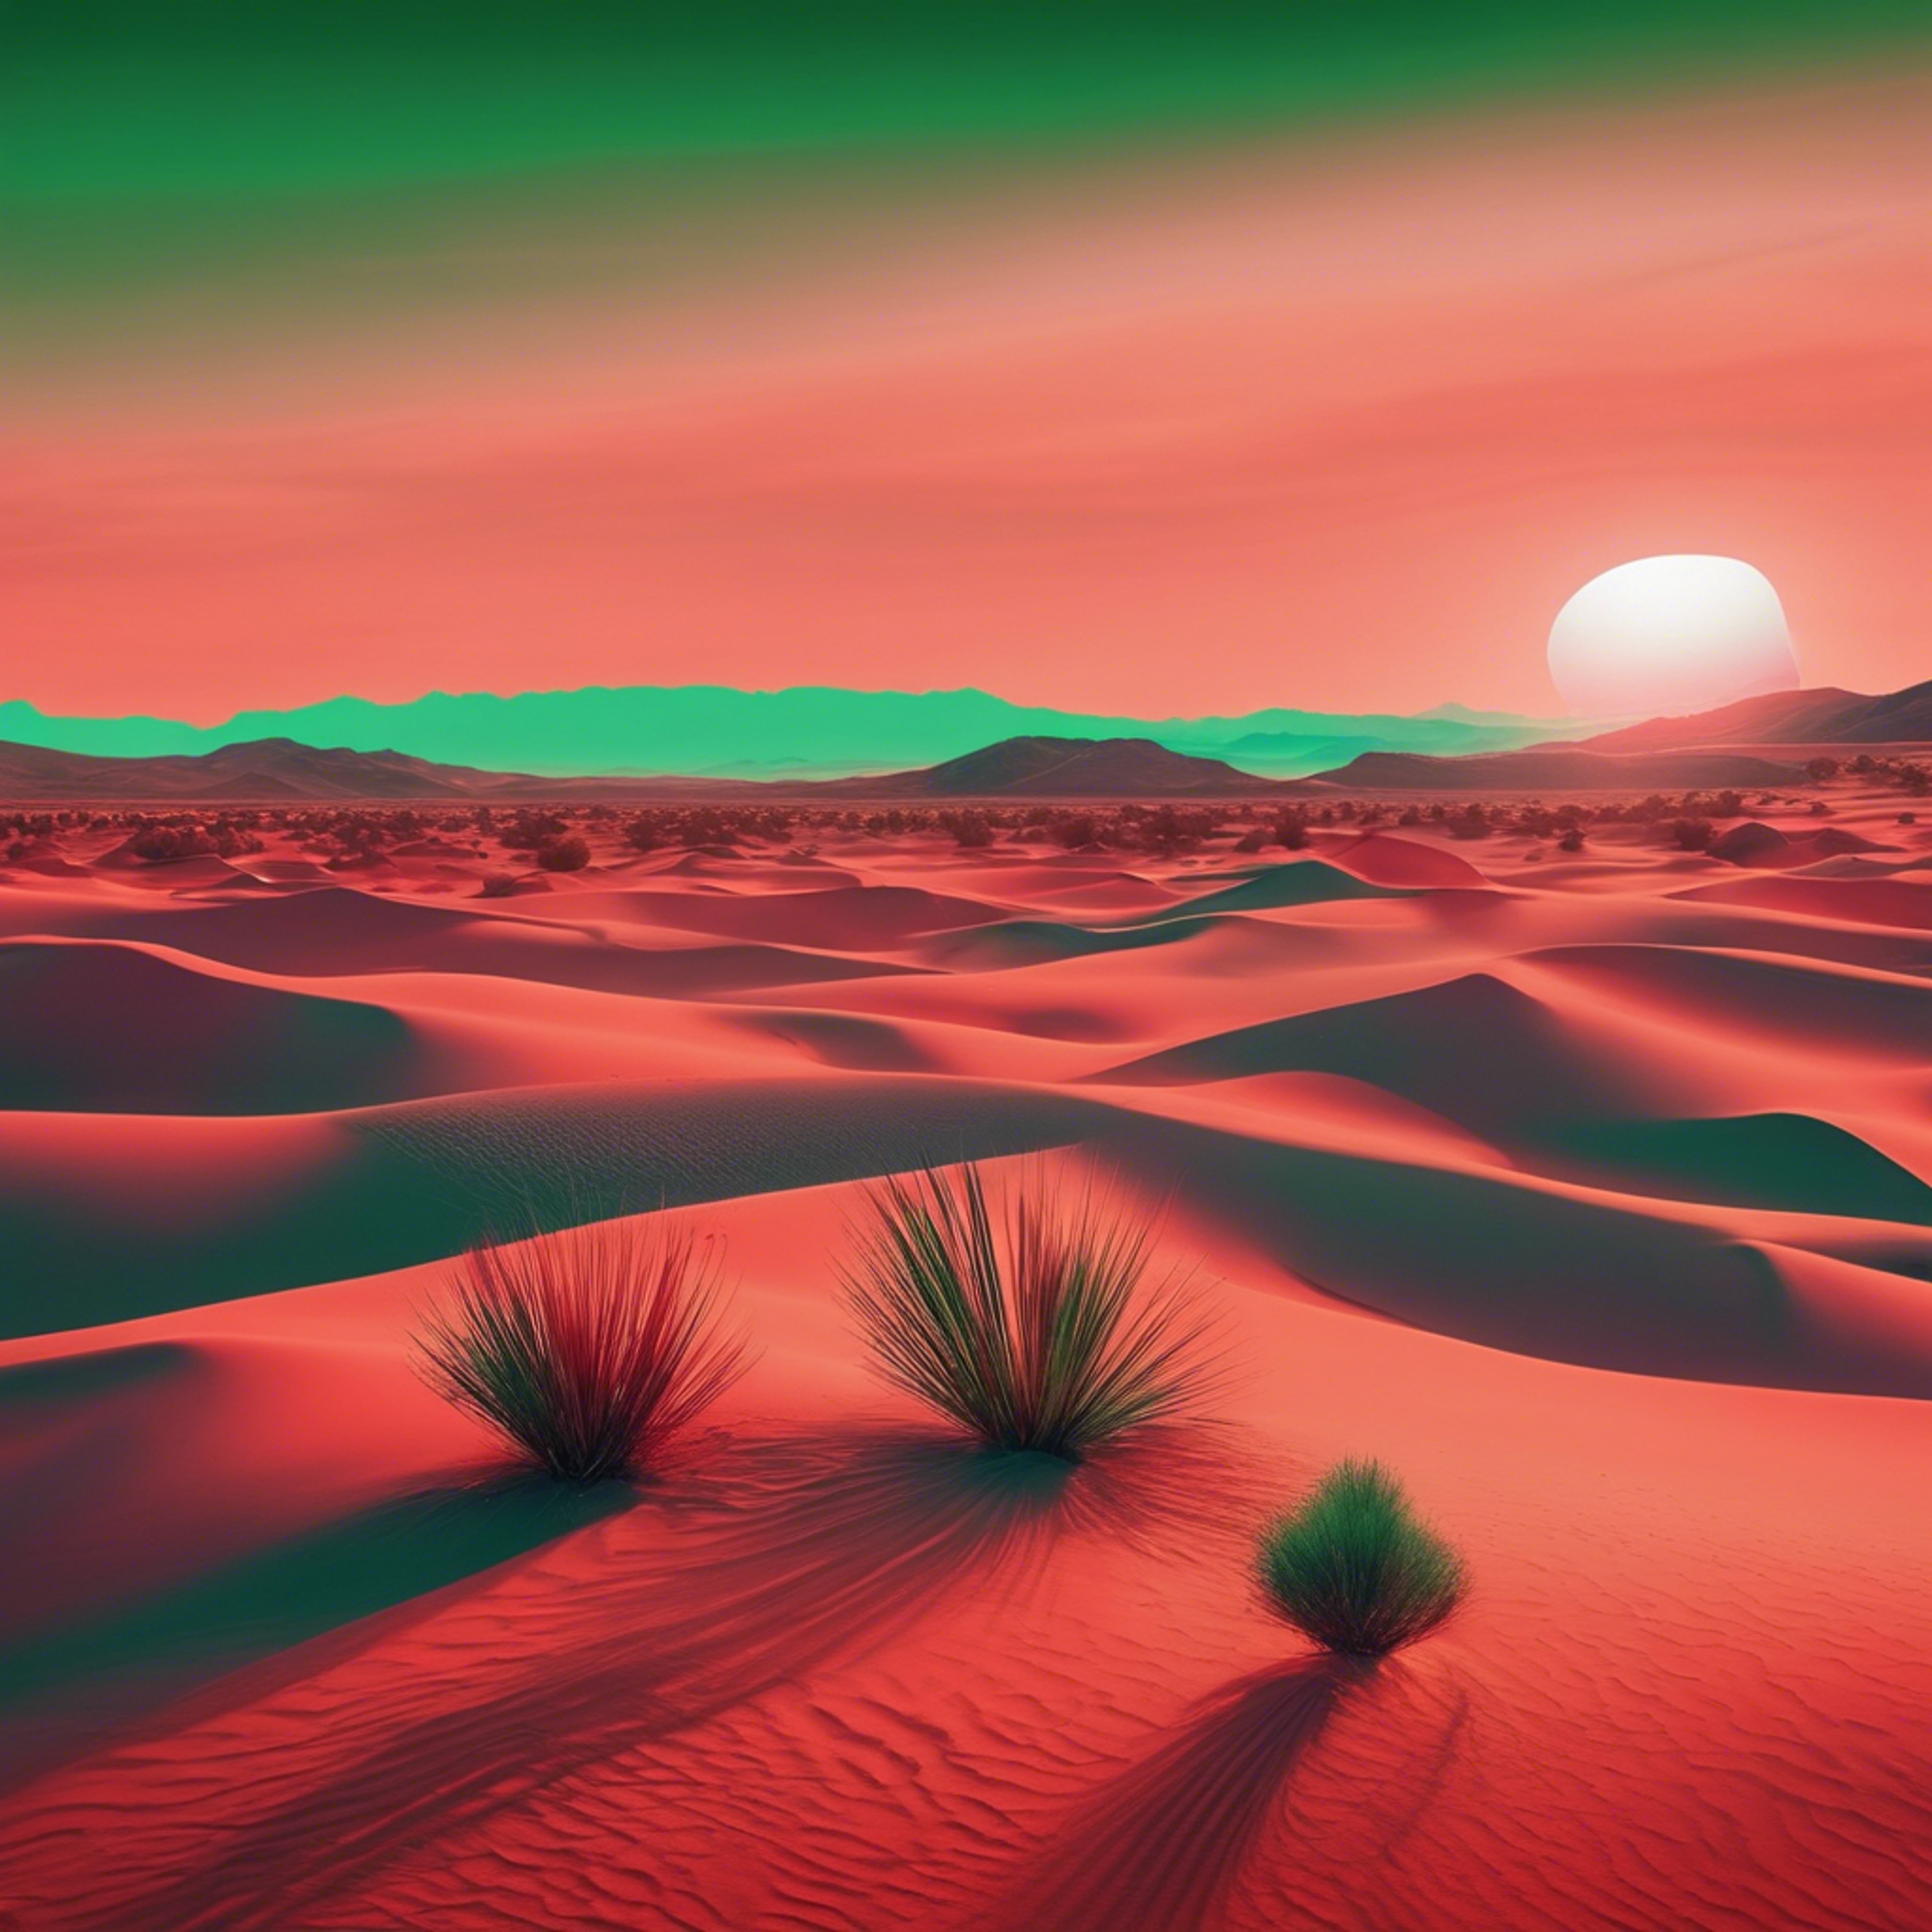 Abstract mirage in red and green, reminiscent of a modern artist's take on a desert sunset 牆紙[3a4ec3a043b54638a7ad]